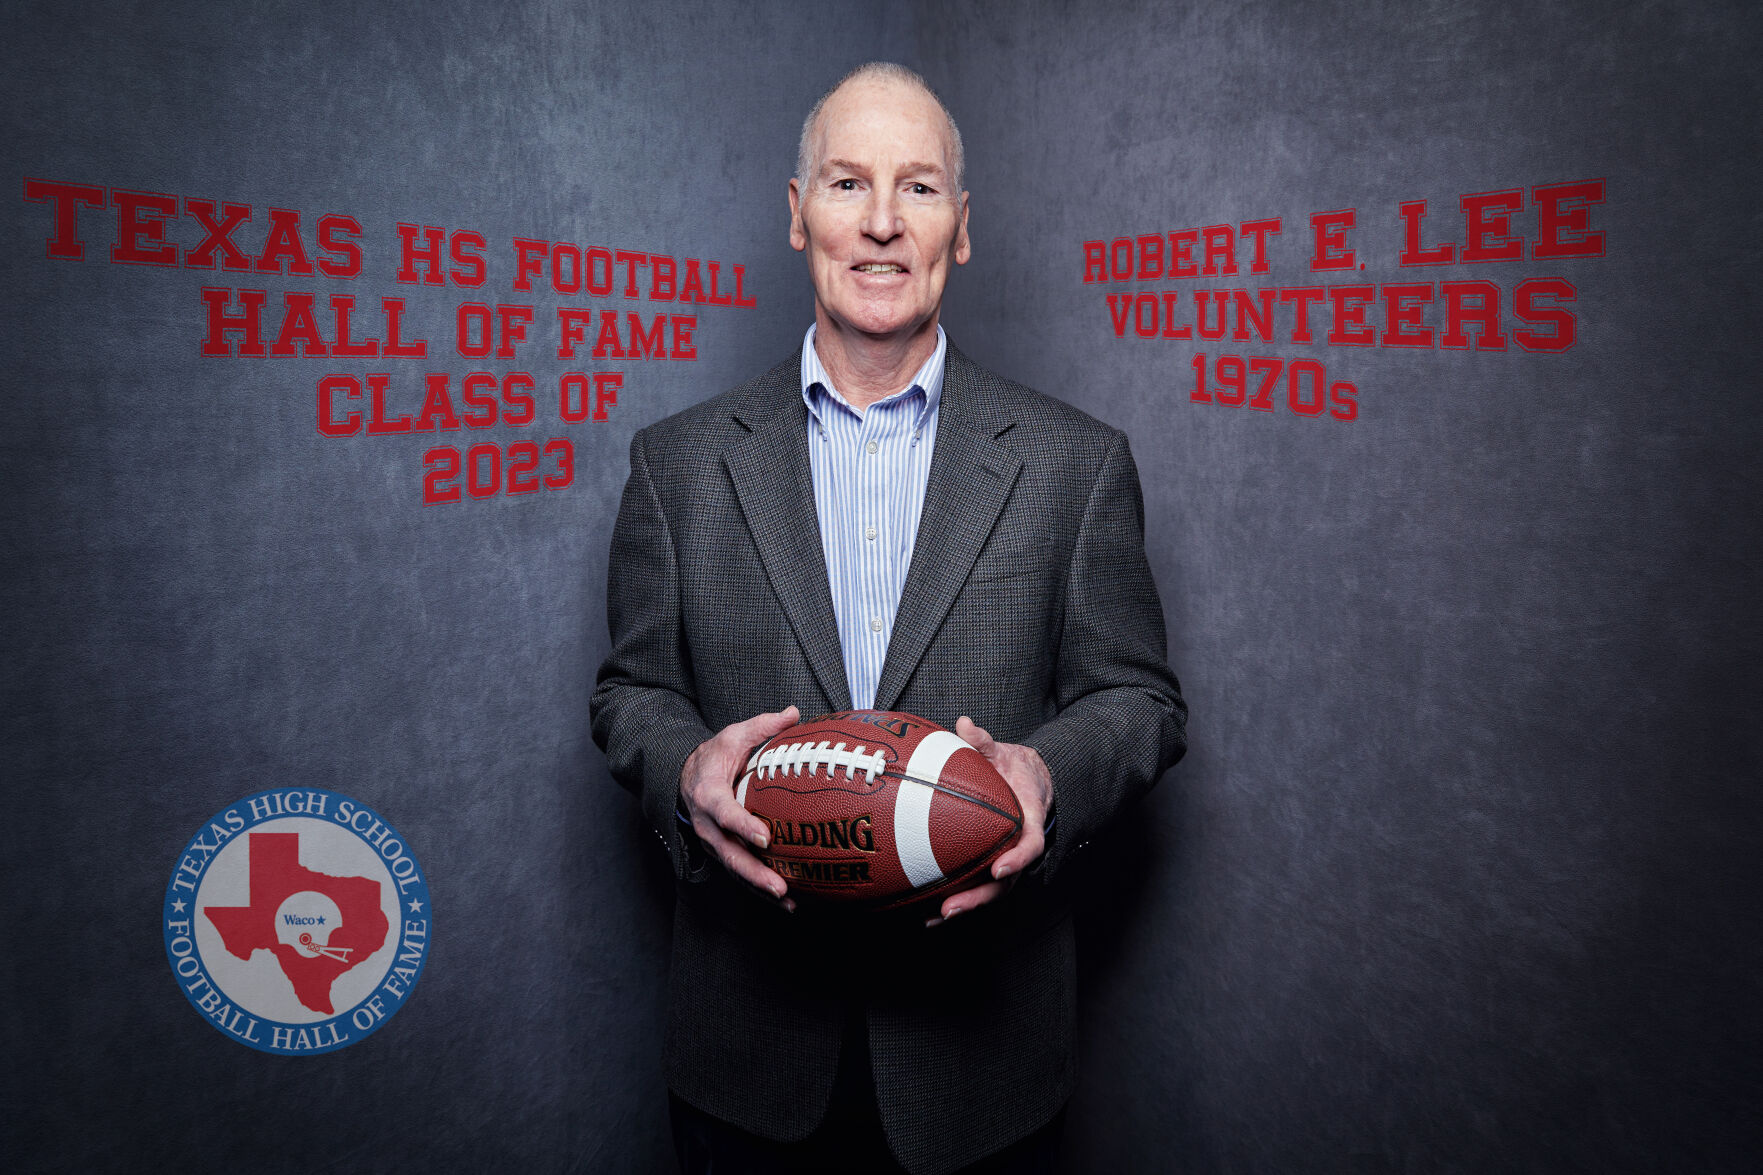 Texas High School Football Hall of Fame Rockett recalls living a dream with Lee football pic image